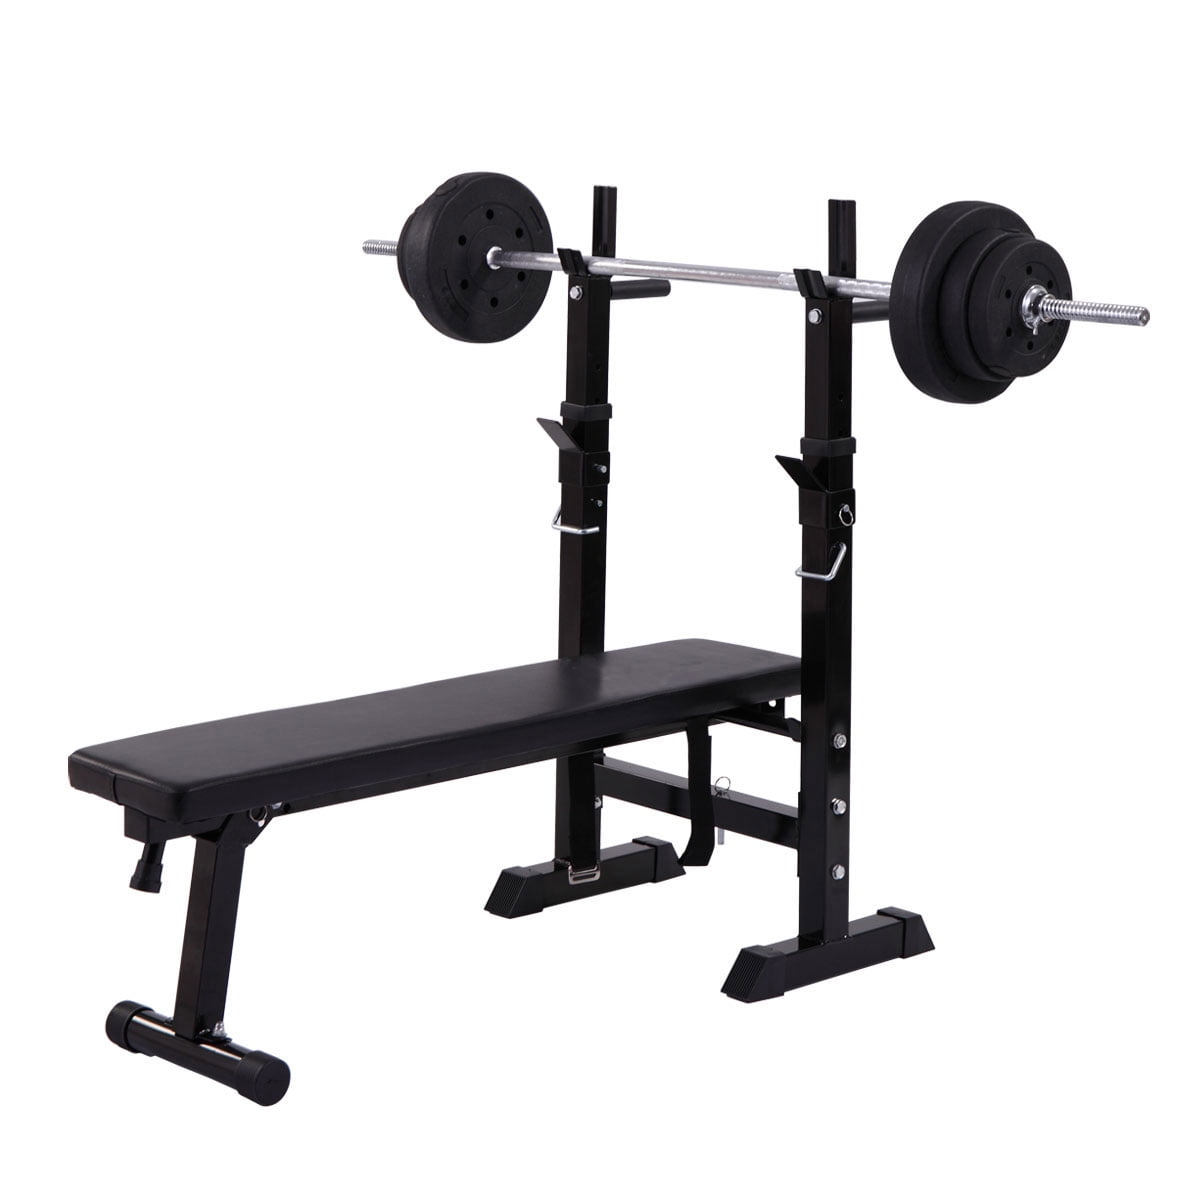 ADJUSTABLE WEIGHT BENCH Press Barbell Rack Exercise Strength Training Workout